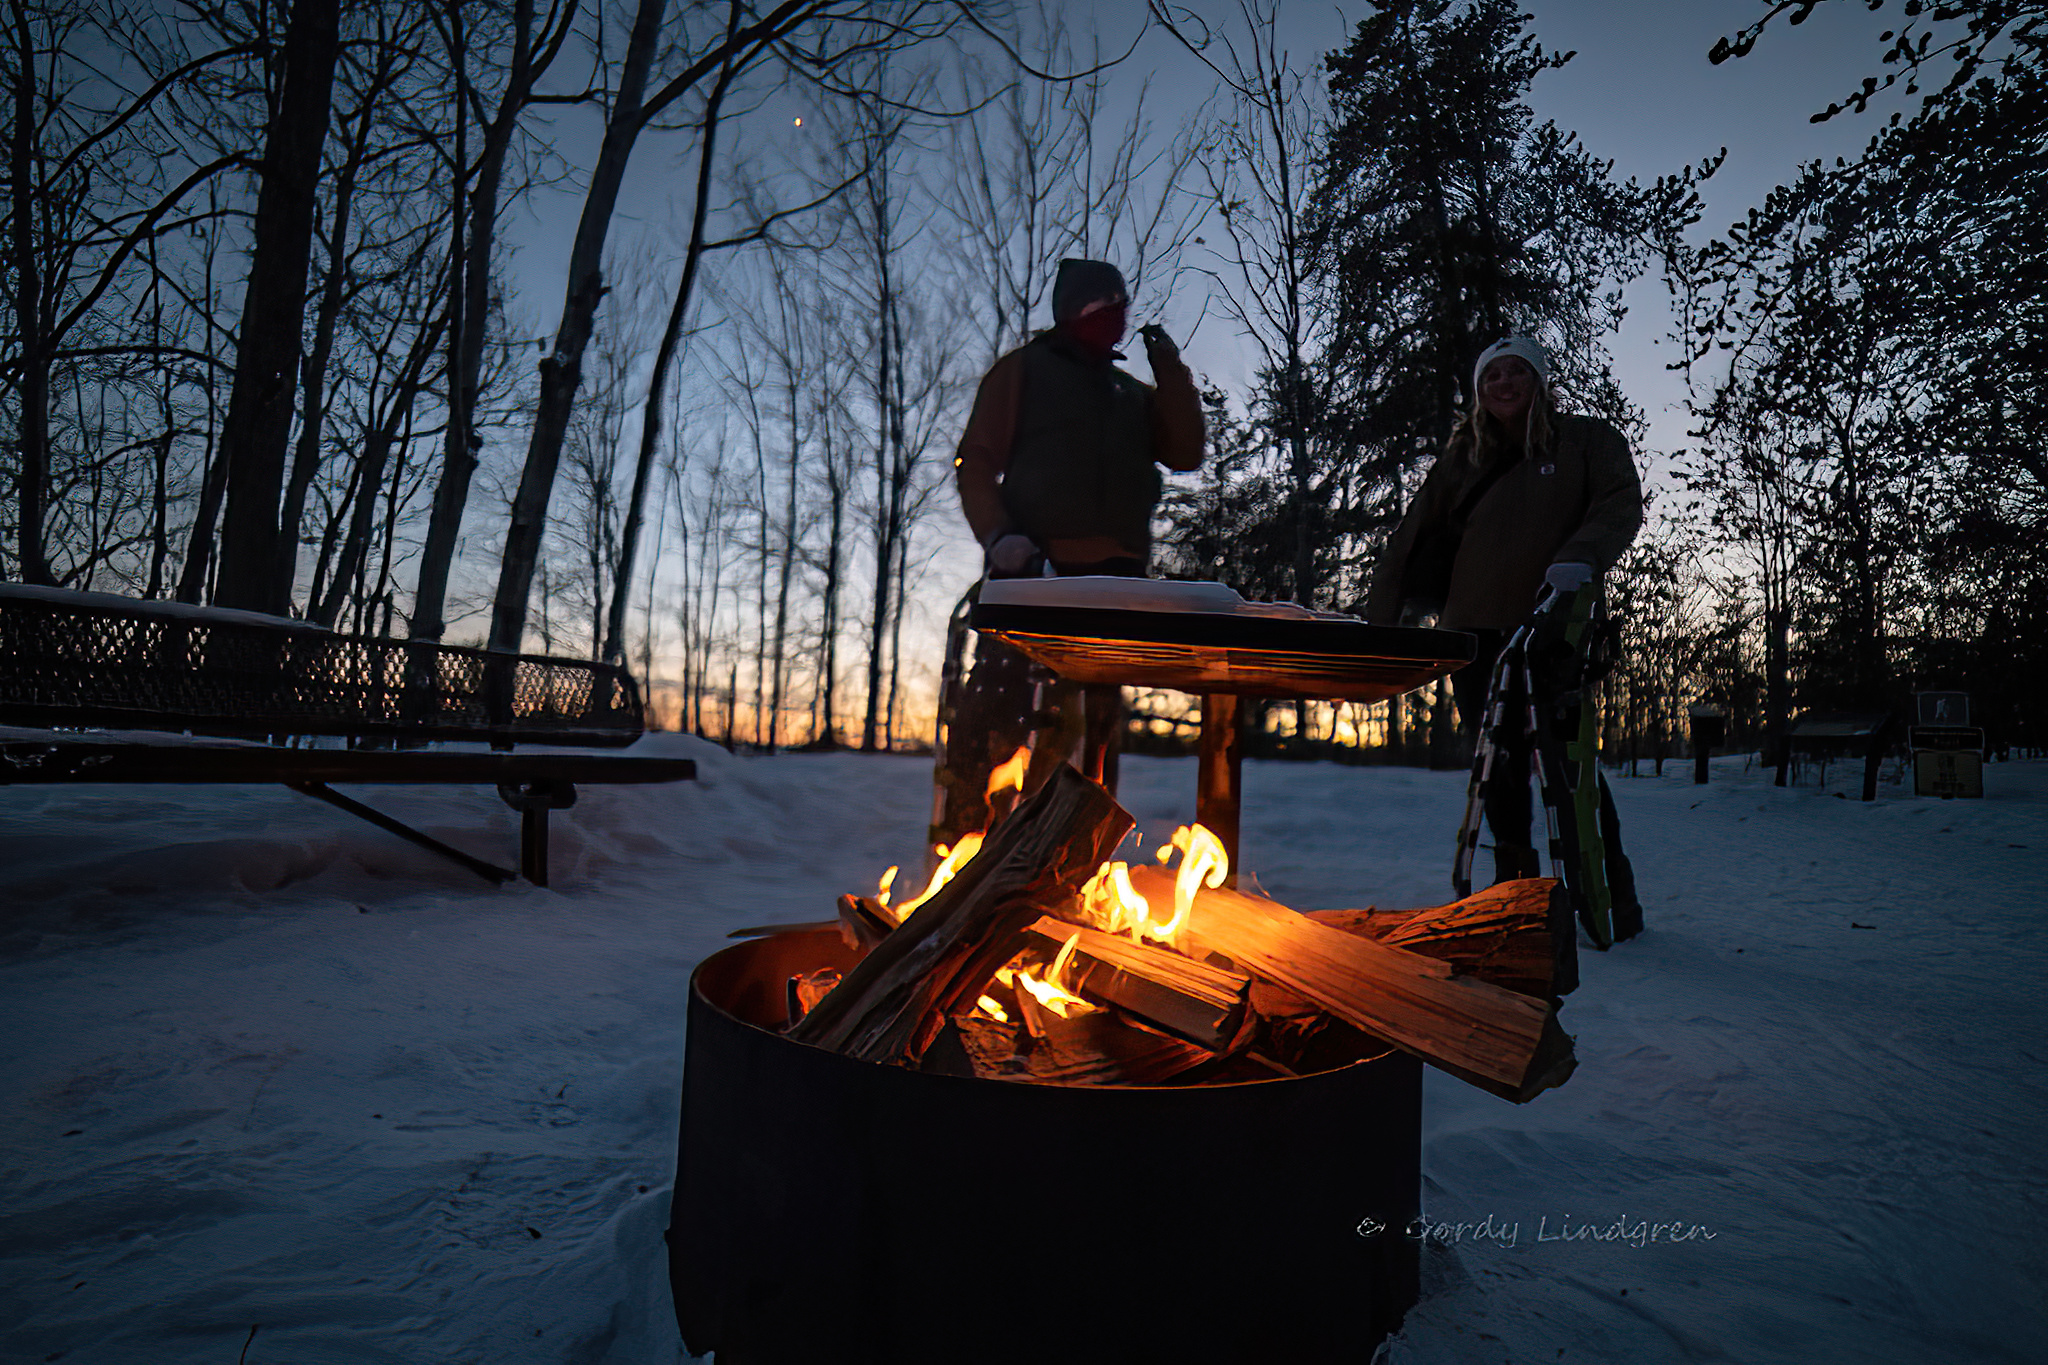 two people with snowshoes gather around a campfire on a snowy evening.